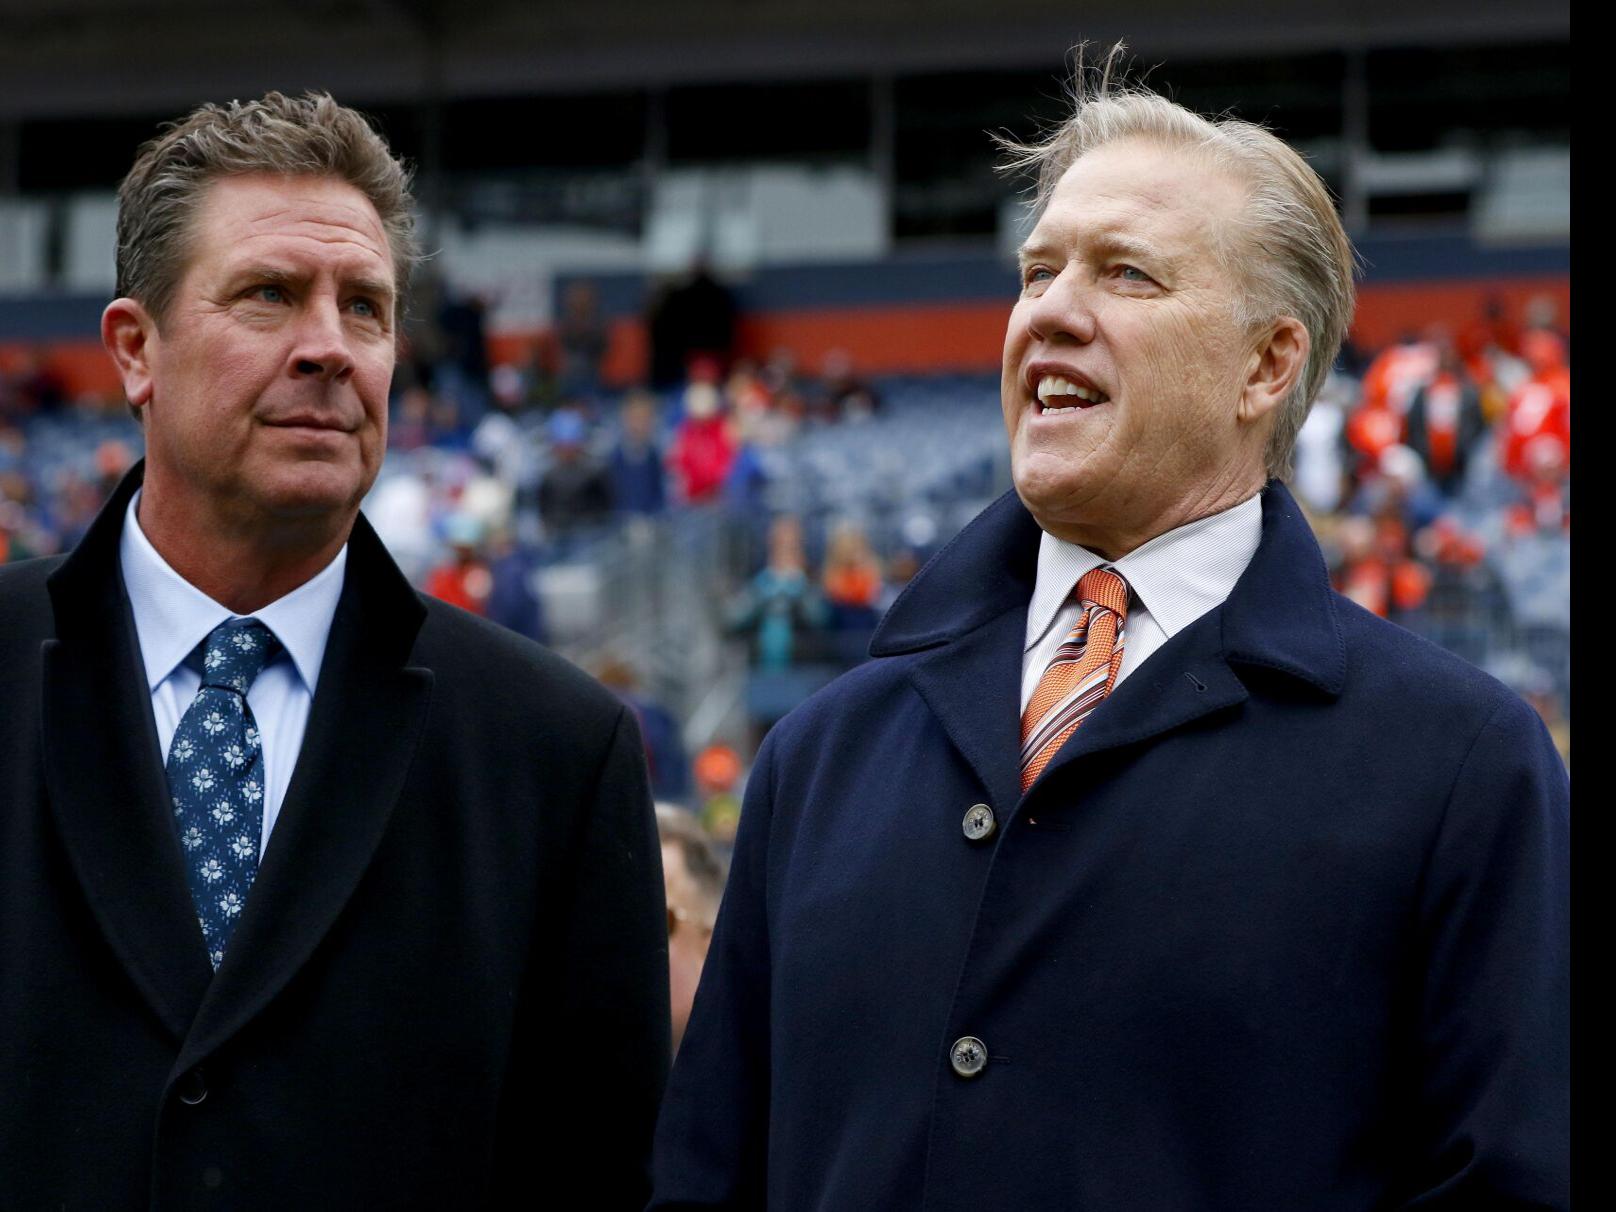 Will Ferrell's Jab at Quarterback John Elway Was 'Talked About in